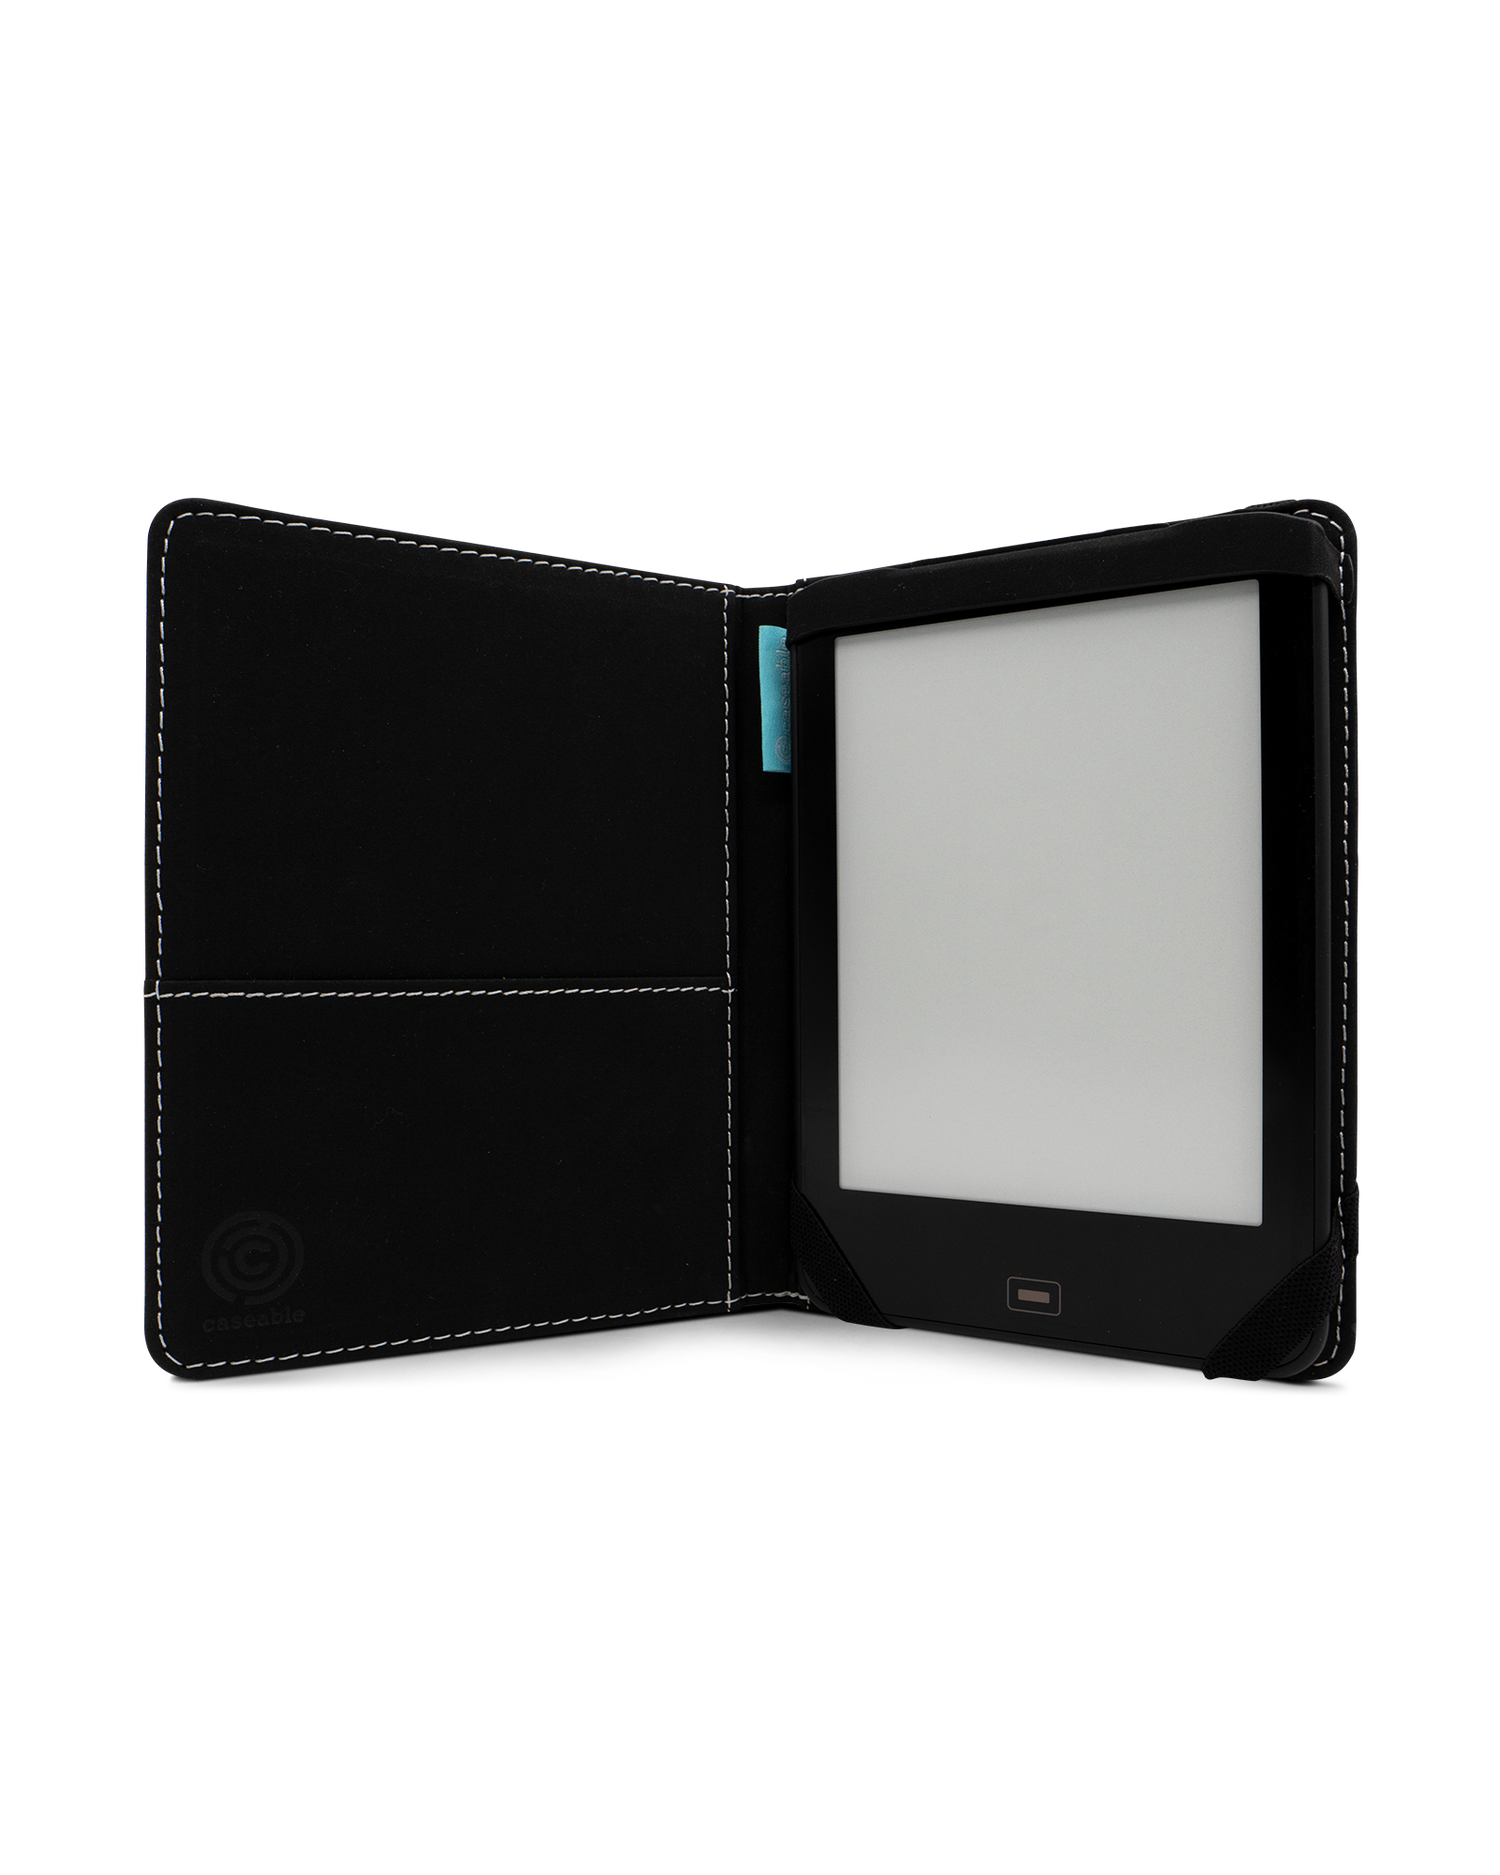 Black Cat eReader Case for tolino vision 1 to 4 HD: Opened interior view